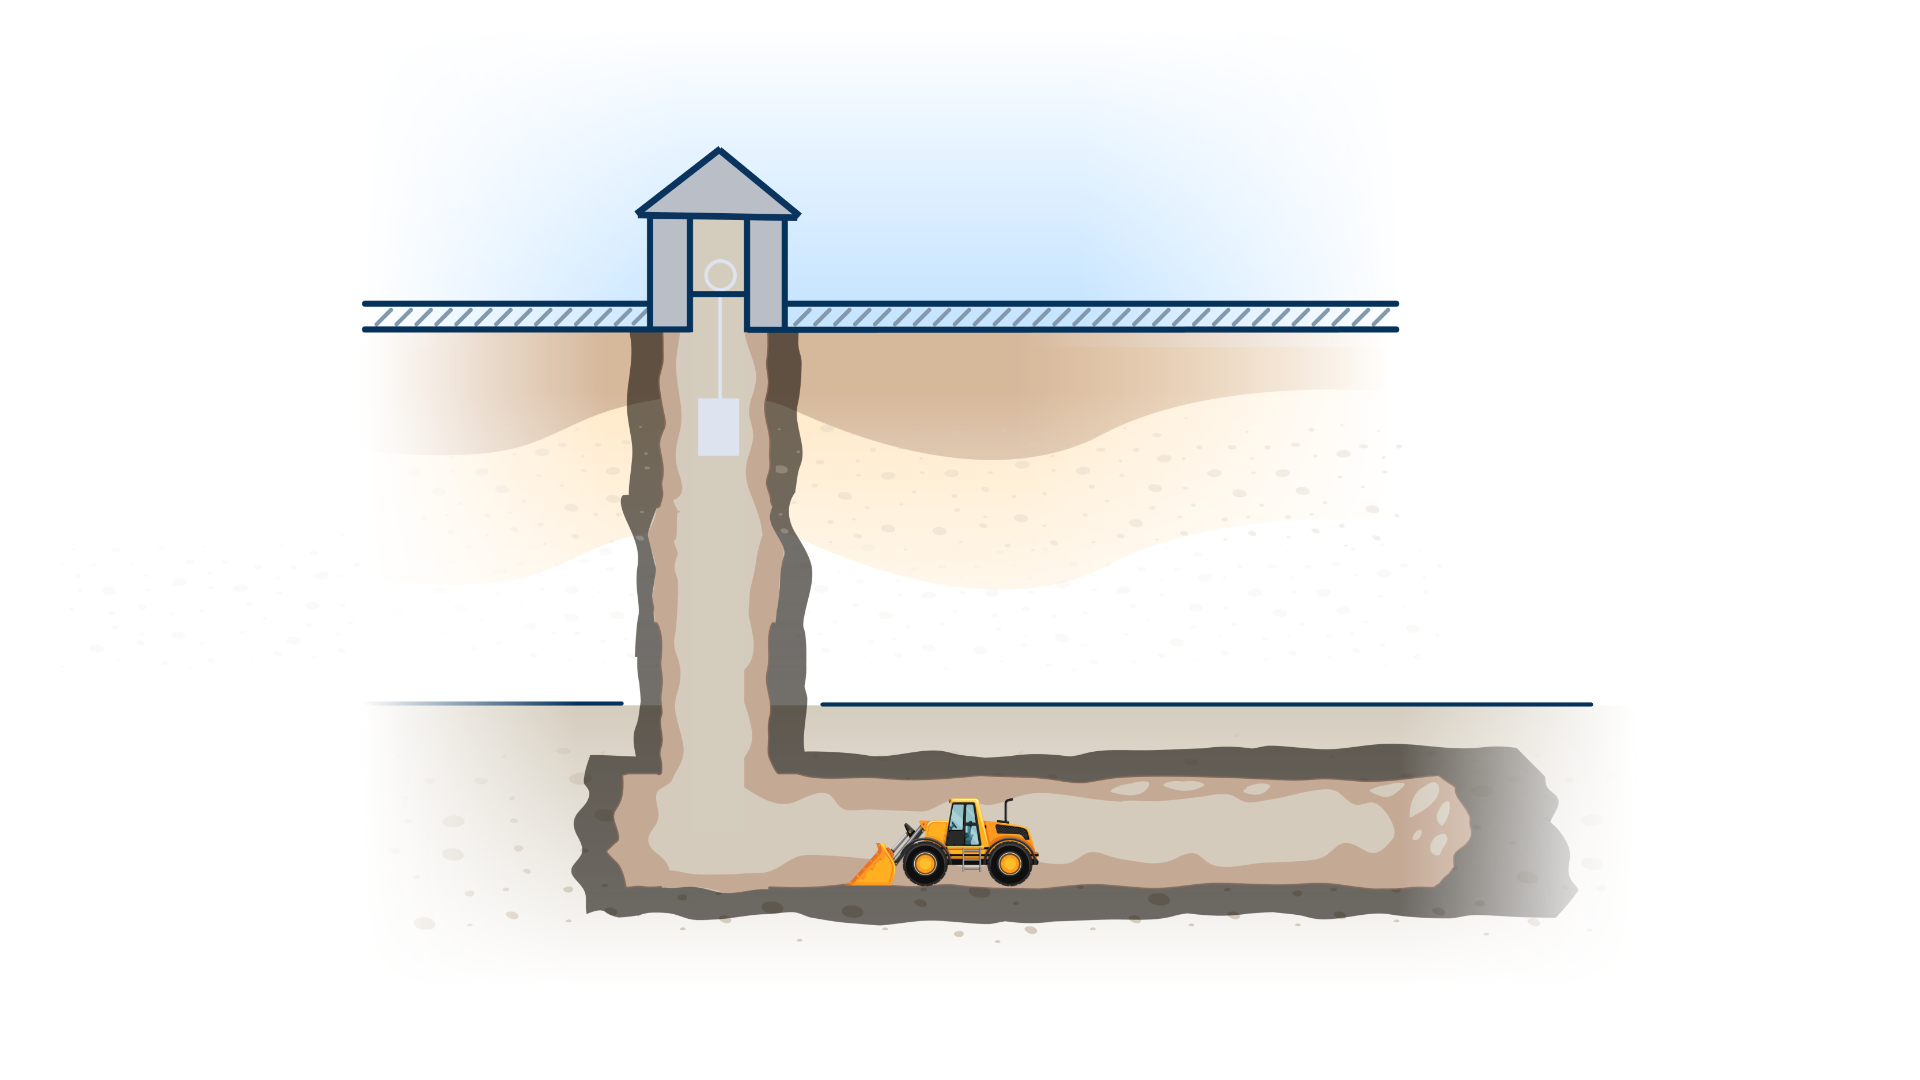 Room and Pillar Mining infographic